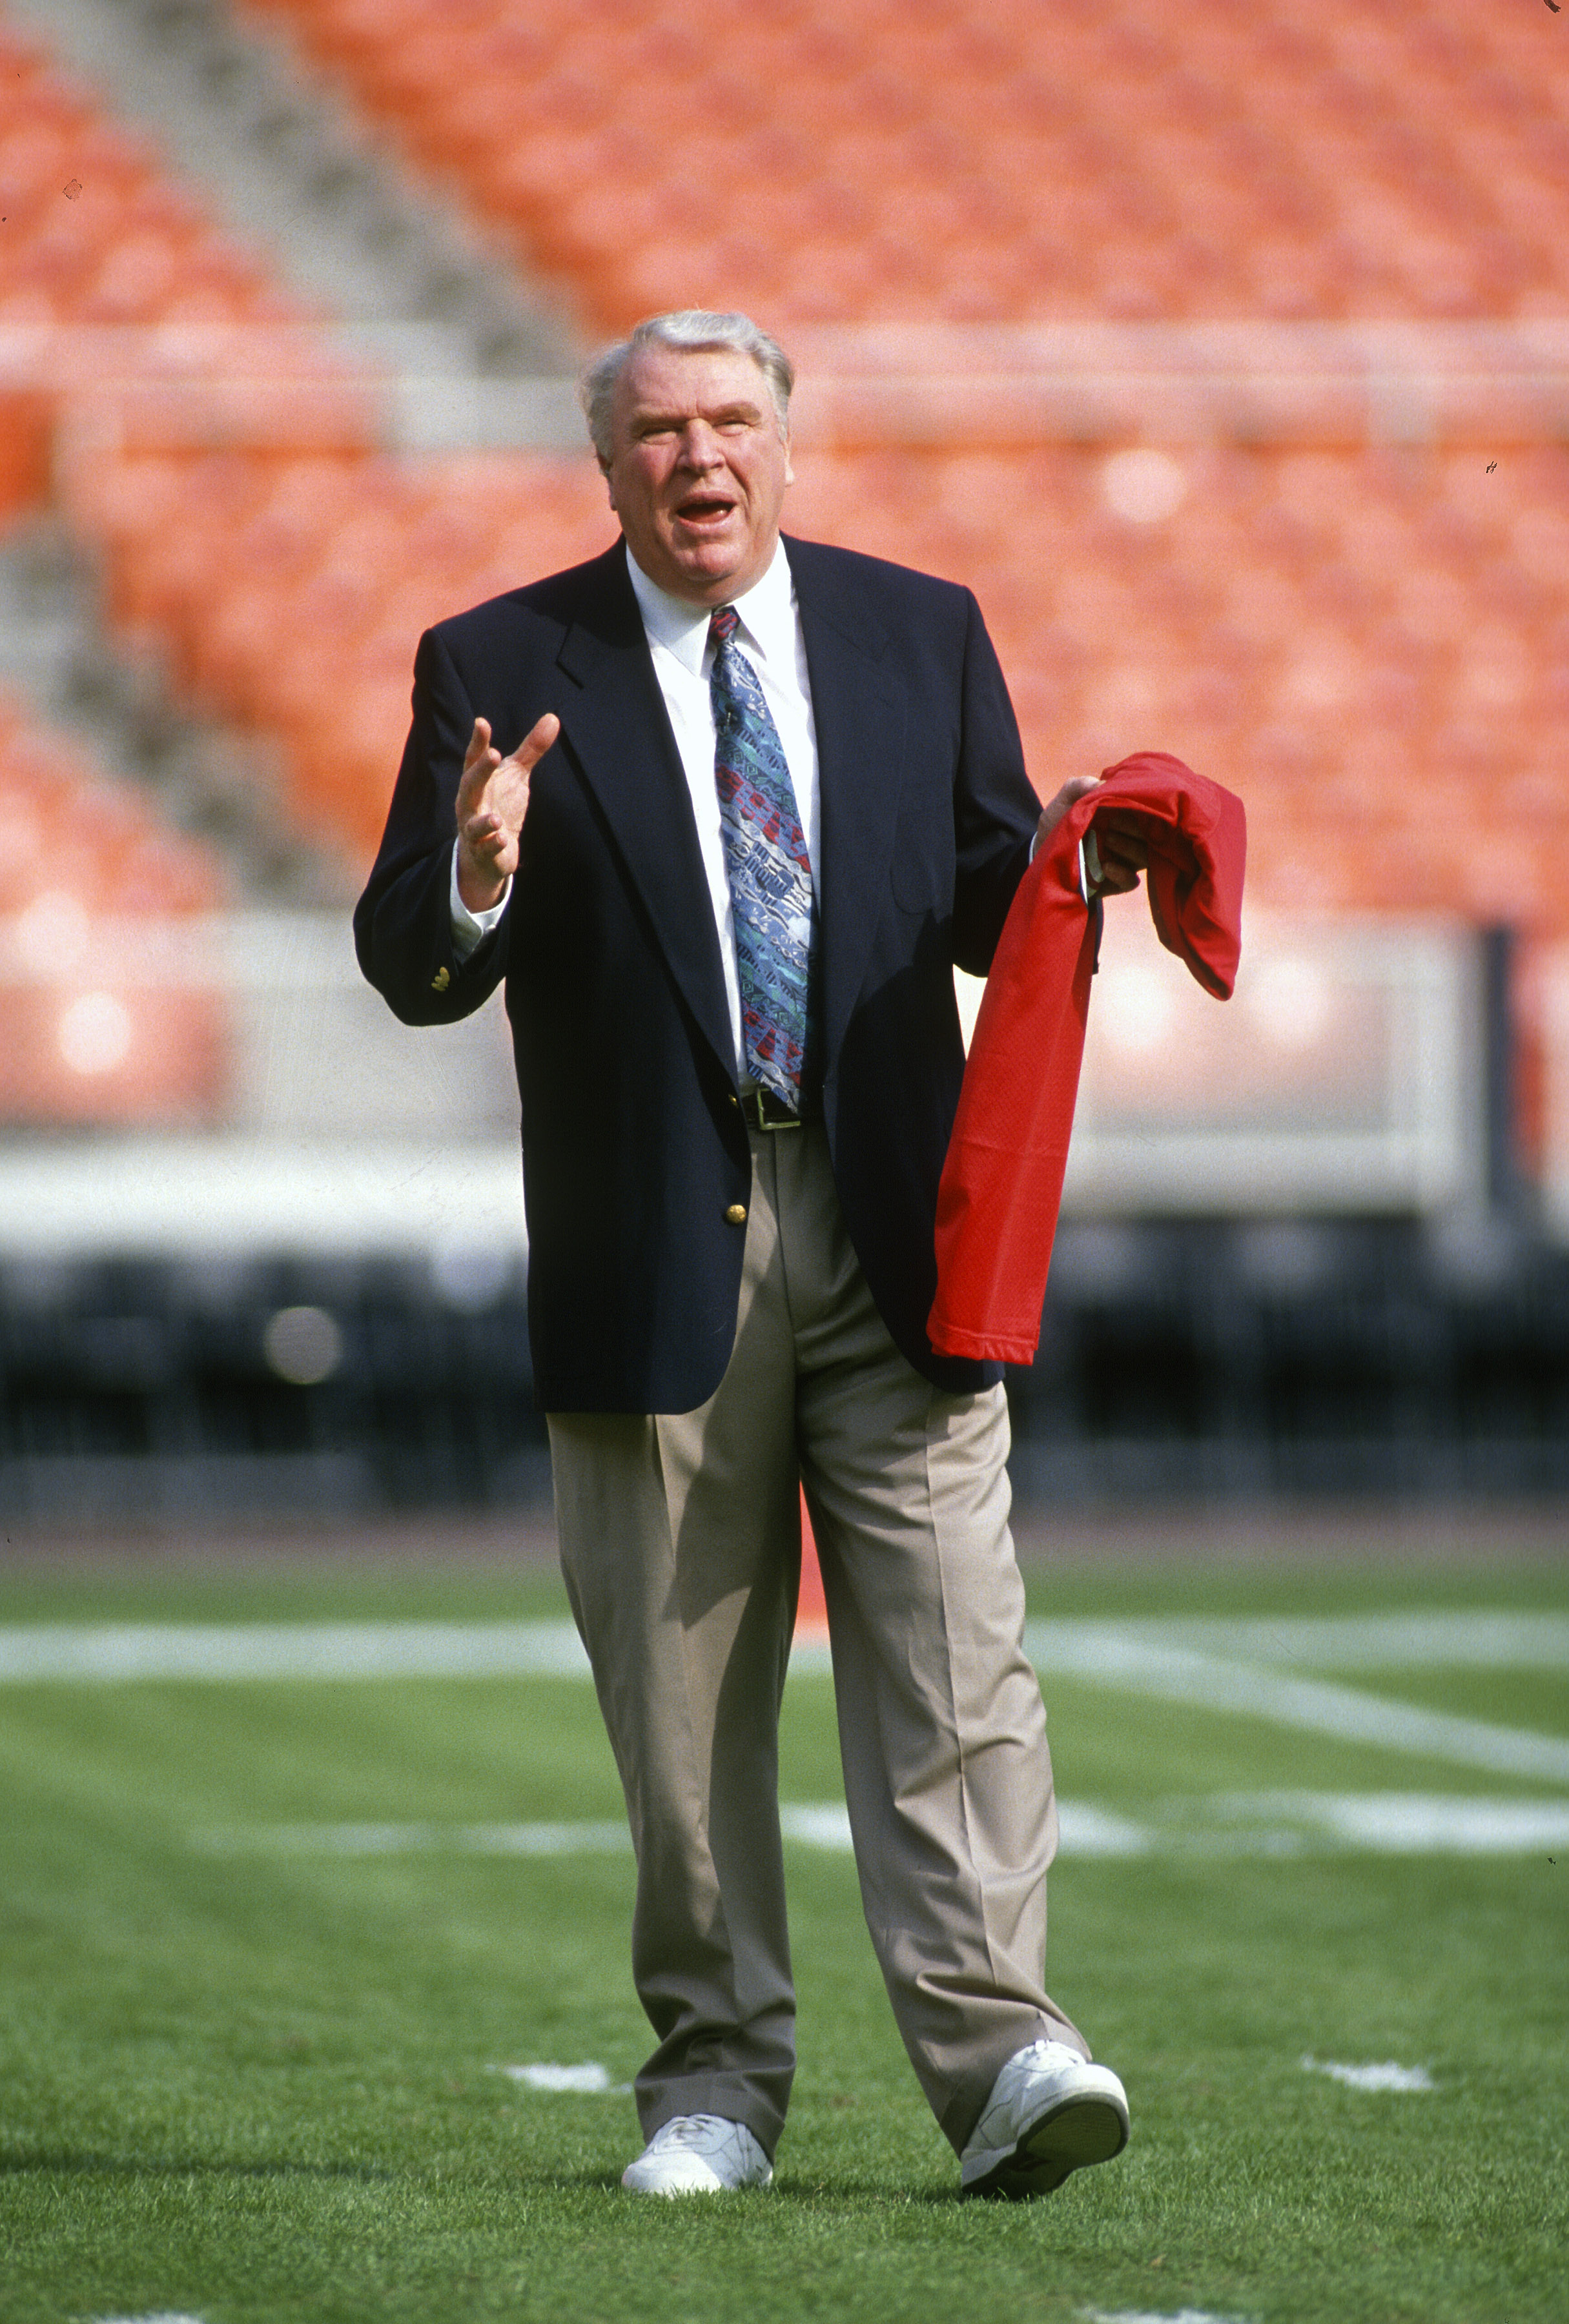 John Madden walks on the field prior to the start of an NFL Football game in 1994. | Source: Getty Images